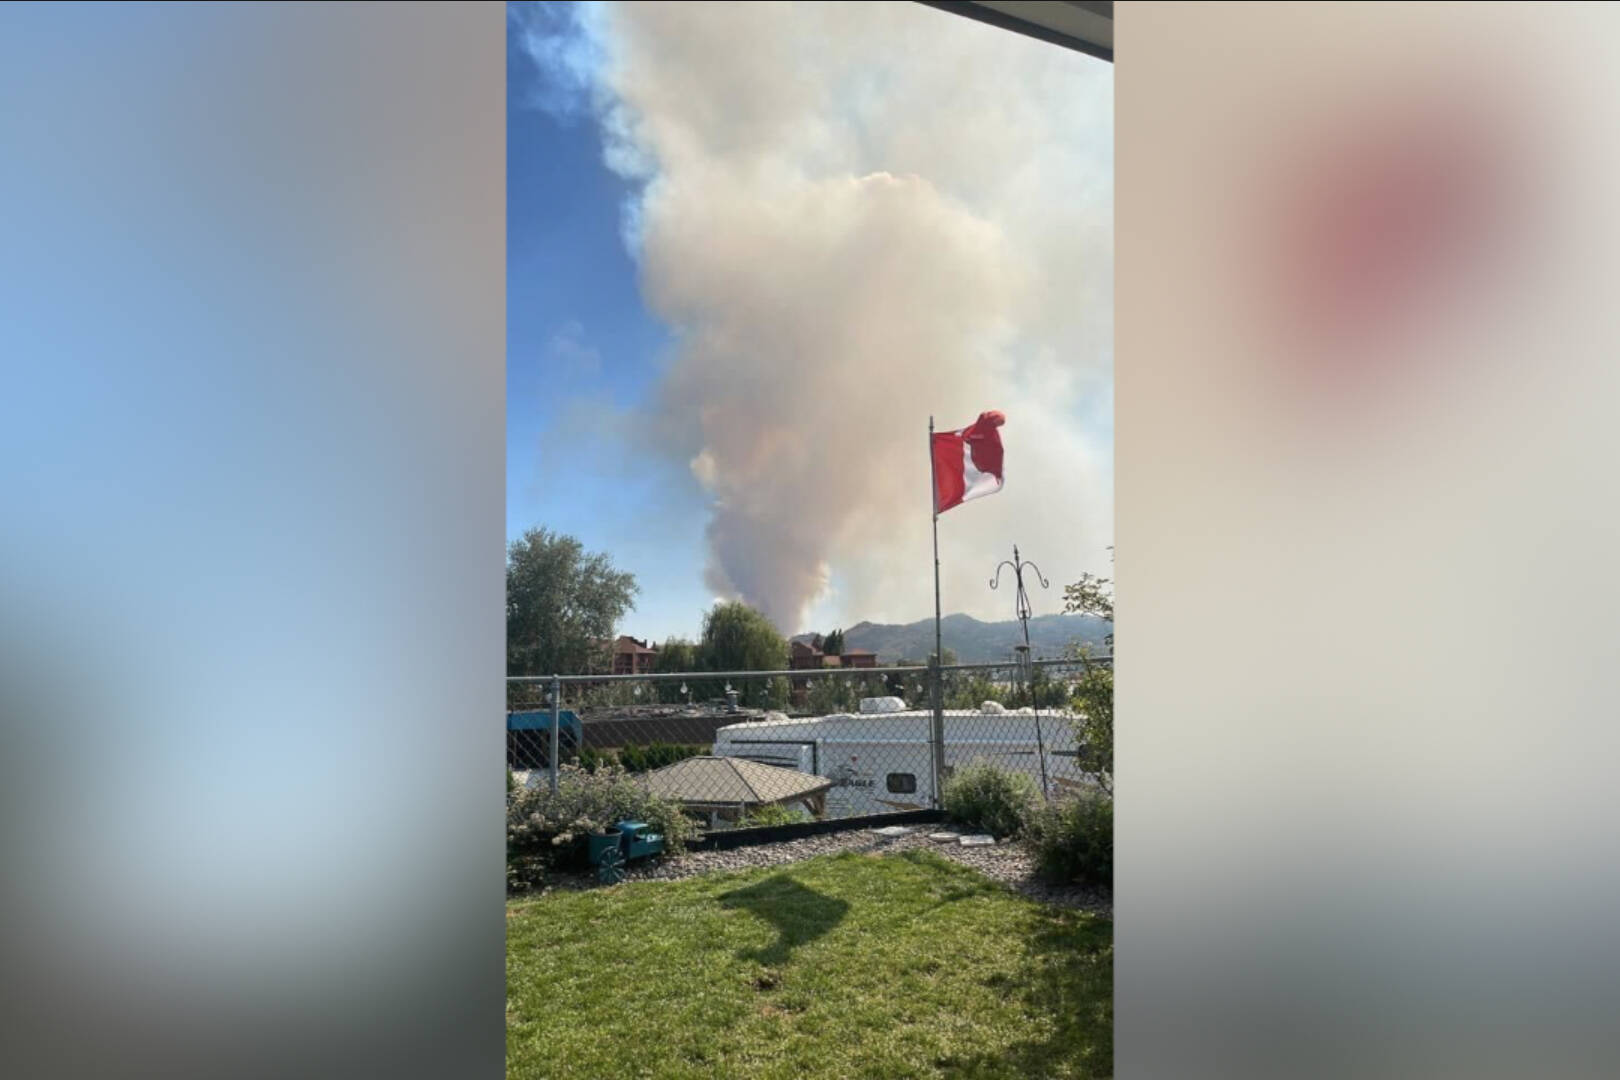 A fire burning southwest of Oroville, Wash. is producing visible smoke that could be seen from Osoyoos. (Cheri Swanson/Facebook)